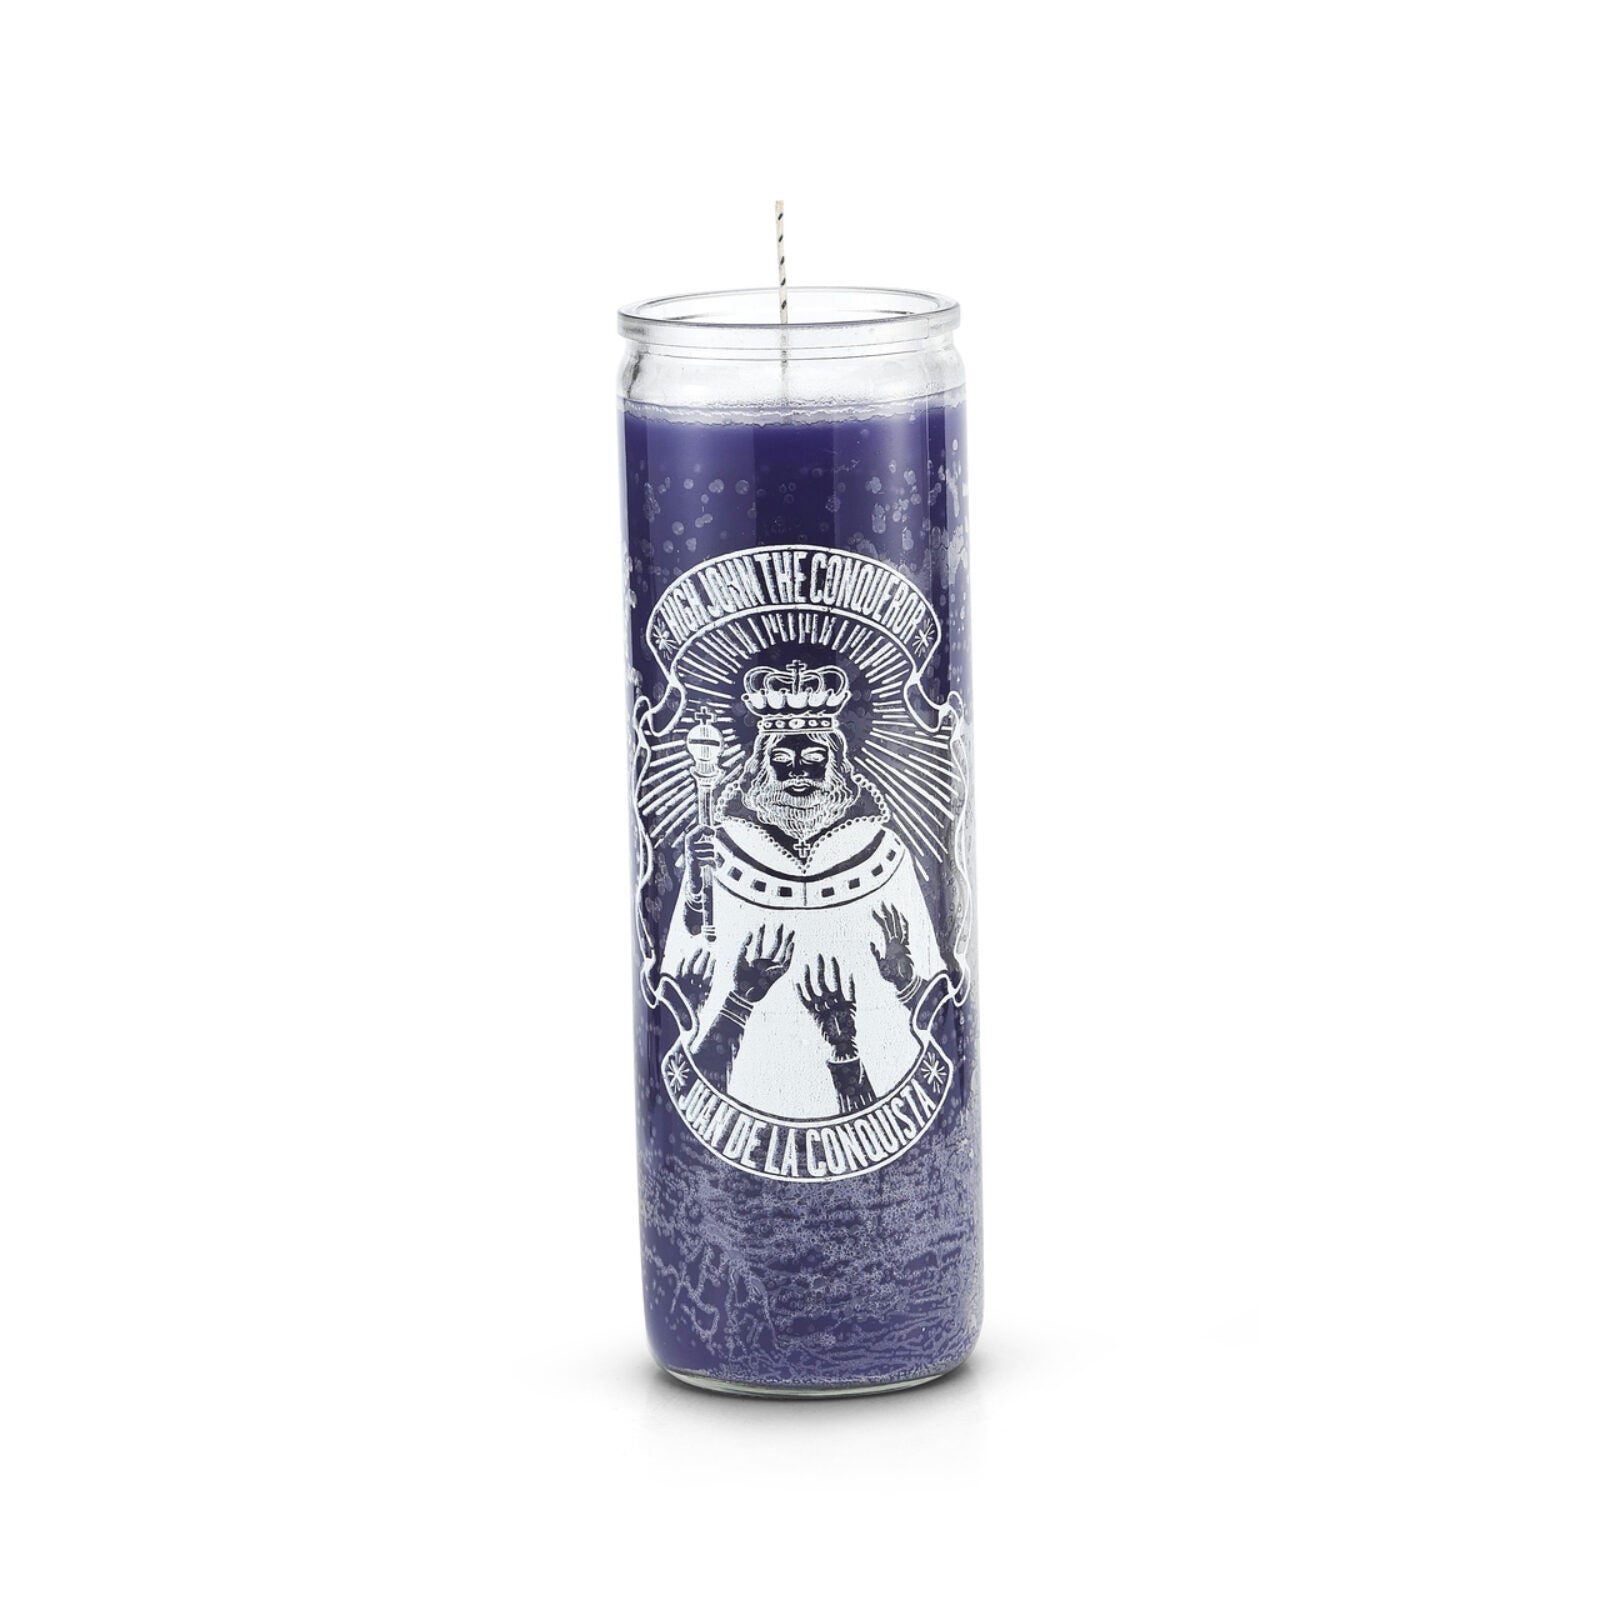 High John The Conqueror Candle 7 Day Purple Check My Vibes